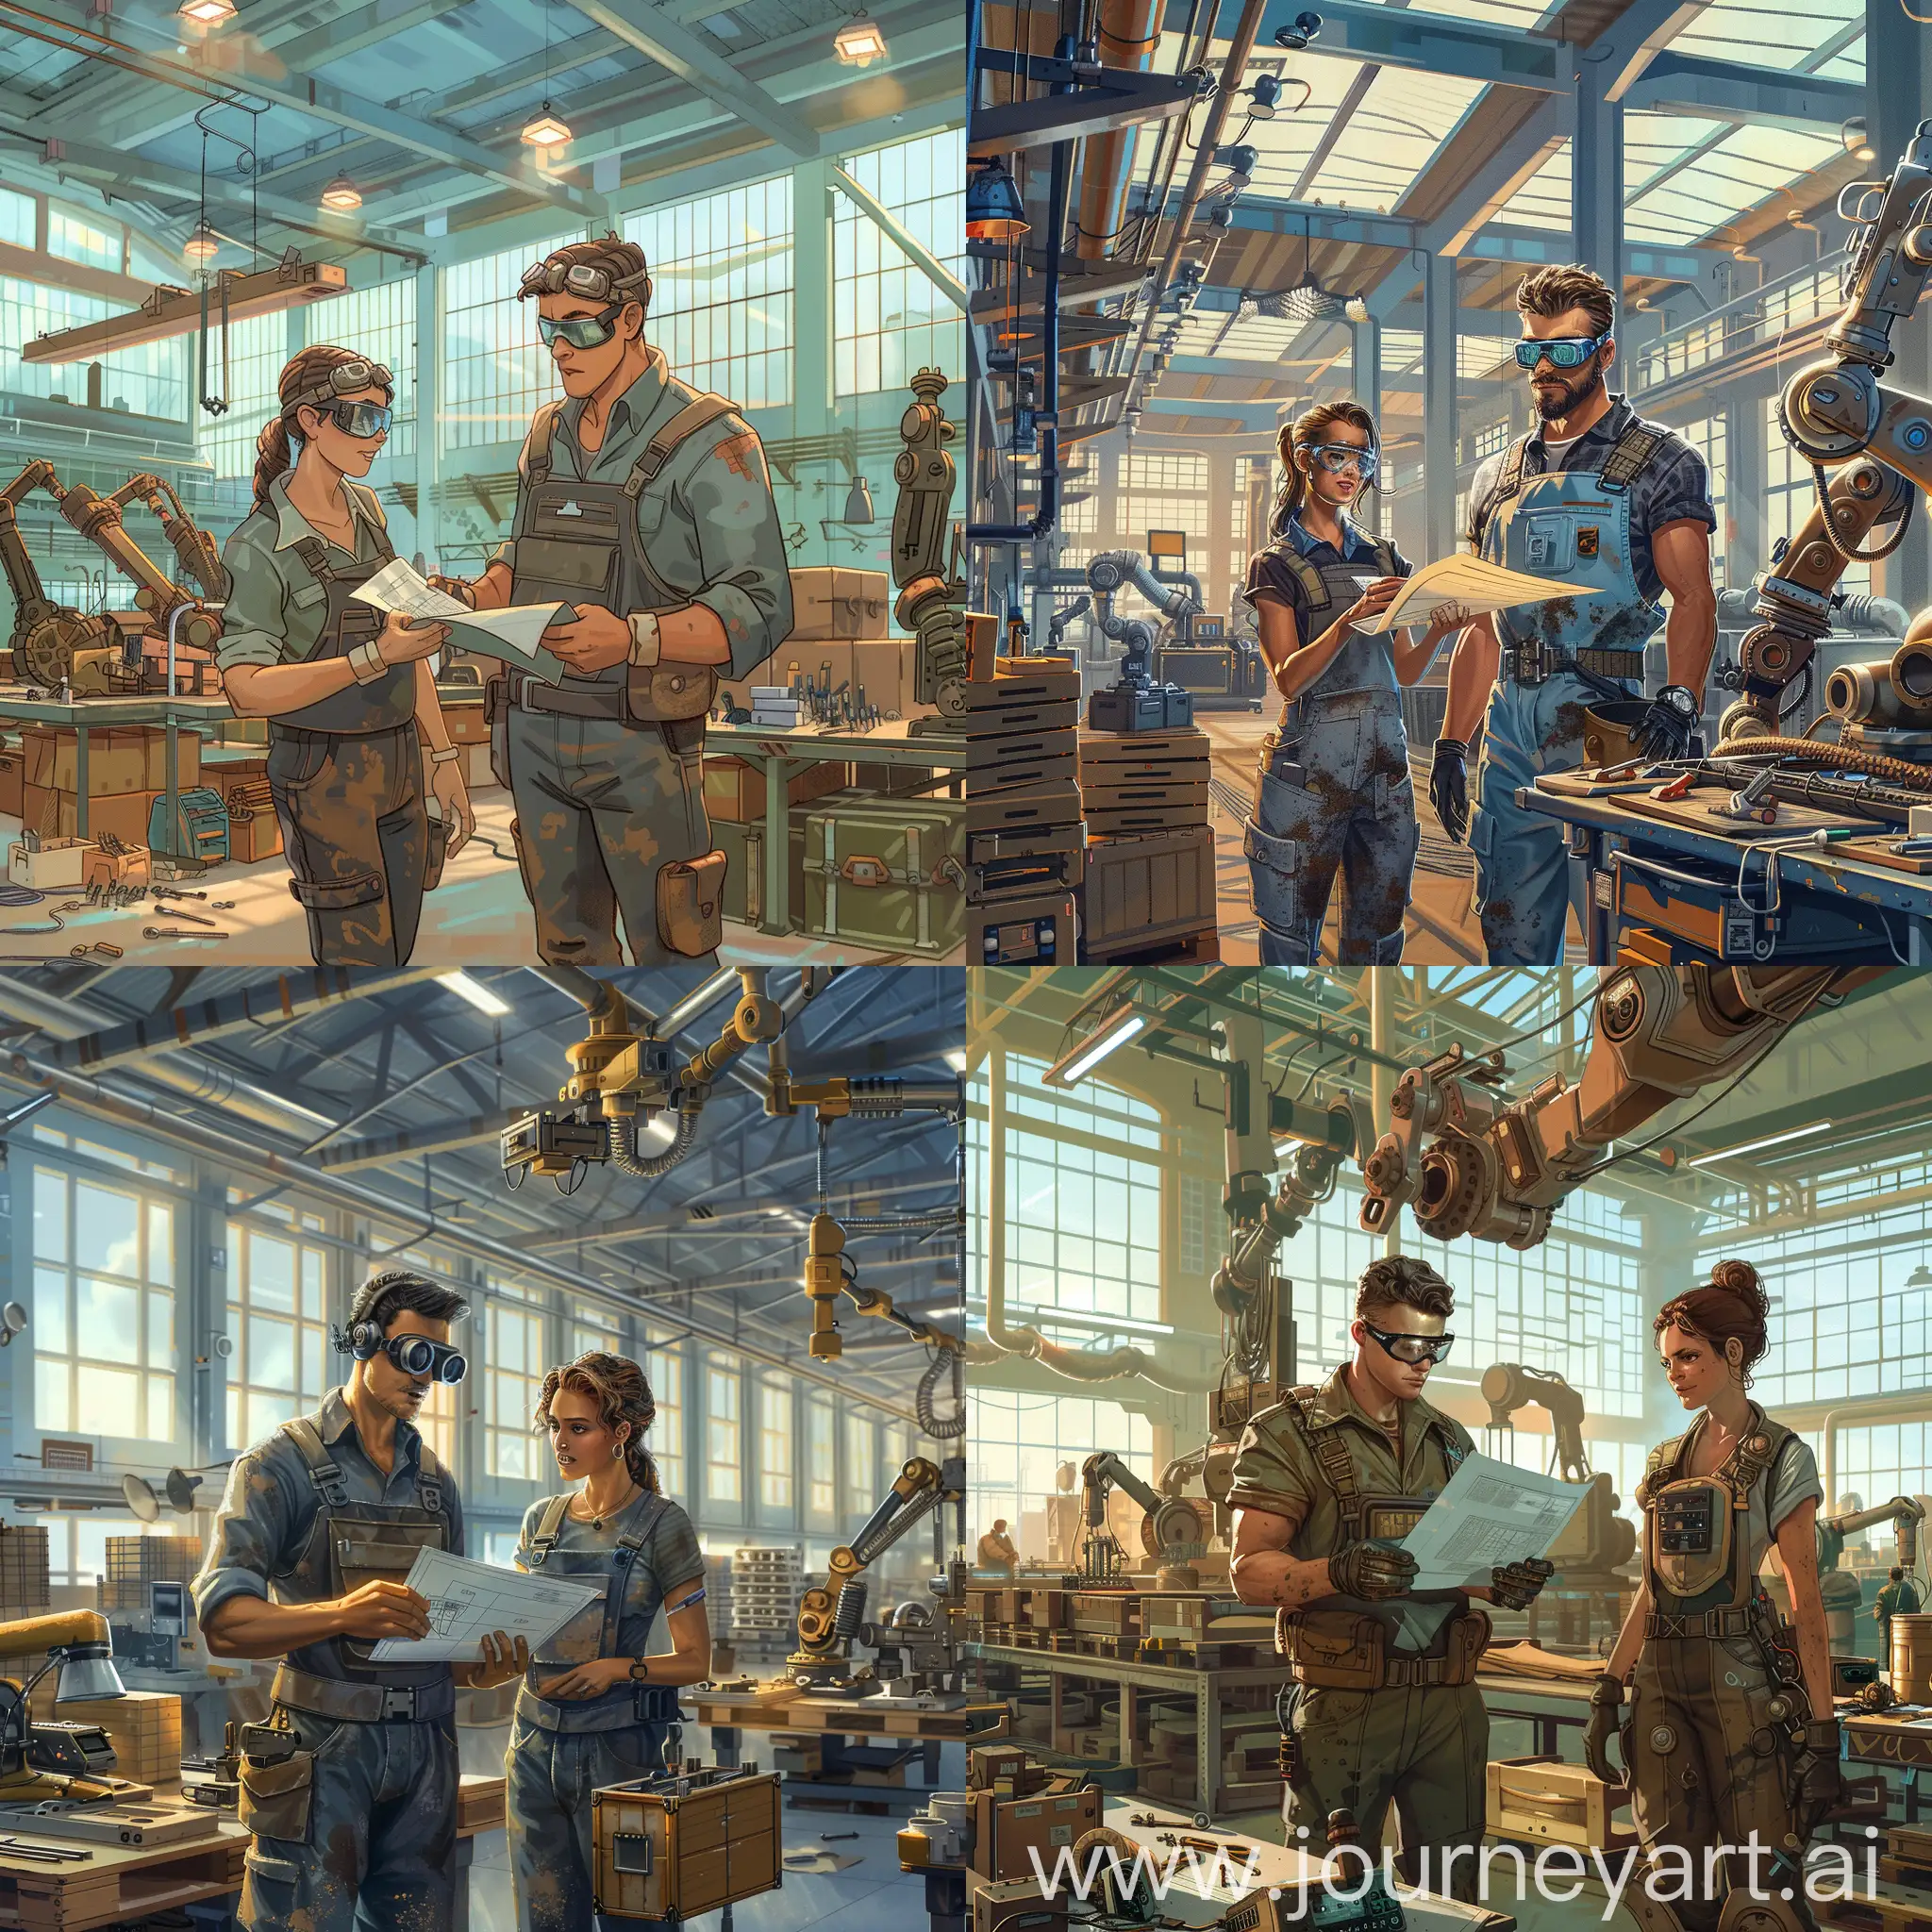 The factory has high ceilings and exposed steel beams, it is welllit, with long rows of overhead fluorescent lights casting a cold, bluish glow over the area. in the distance, tall stacks of wooden crates are visible, waiting to be filled and shipped. Large windows line the walls, offering a glimpse of a doudy sky outside  Background:  1. Main Character: Jake, a young and ambitious engineer in his late 20s, is standing at the forefront of the scene. He is wearing a pair of protective goggles and a dusty grease-stained overall. His face reflects a determined expression as he inspects a blueprint in his hands.  Characters:  2. Co-worker, Sarah, a skilled technician, stands beside Jake. She is in her sarly 30s, wearing a similar overall and holding a toolbox She looks focused and is pointing at something on the blueprint, engaging in a discussion with Jake  Objects:  Various industrial machinery fills the factory, including a large mechanical assembly line that stretches across the room. Conveyor belts are moving transporting partially atsernbled components, and robotic arms are performing precise tasks. There are tool stations scattered around the area with wrenches, screwdrivers, and other tools neatly arranged.